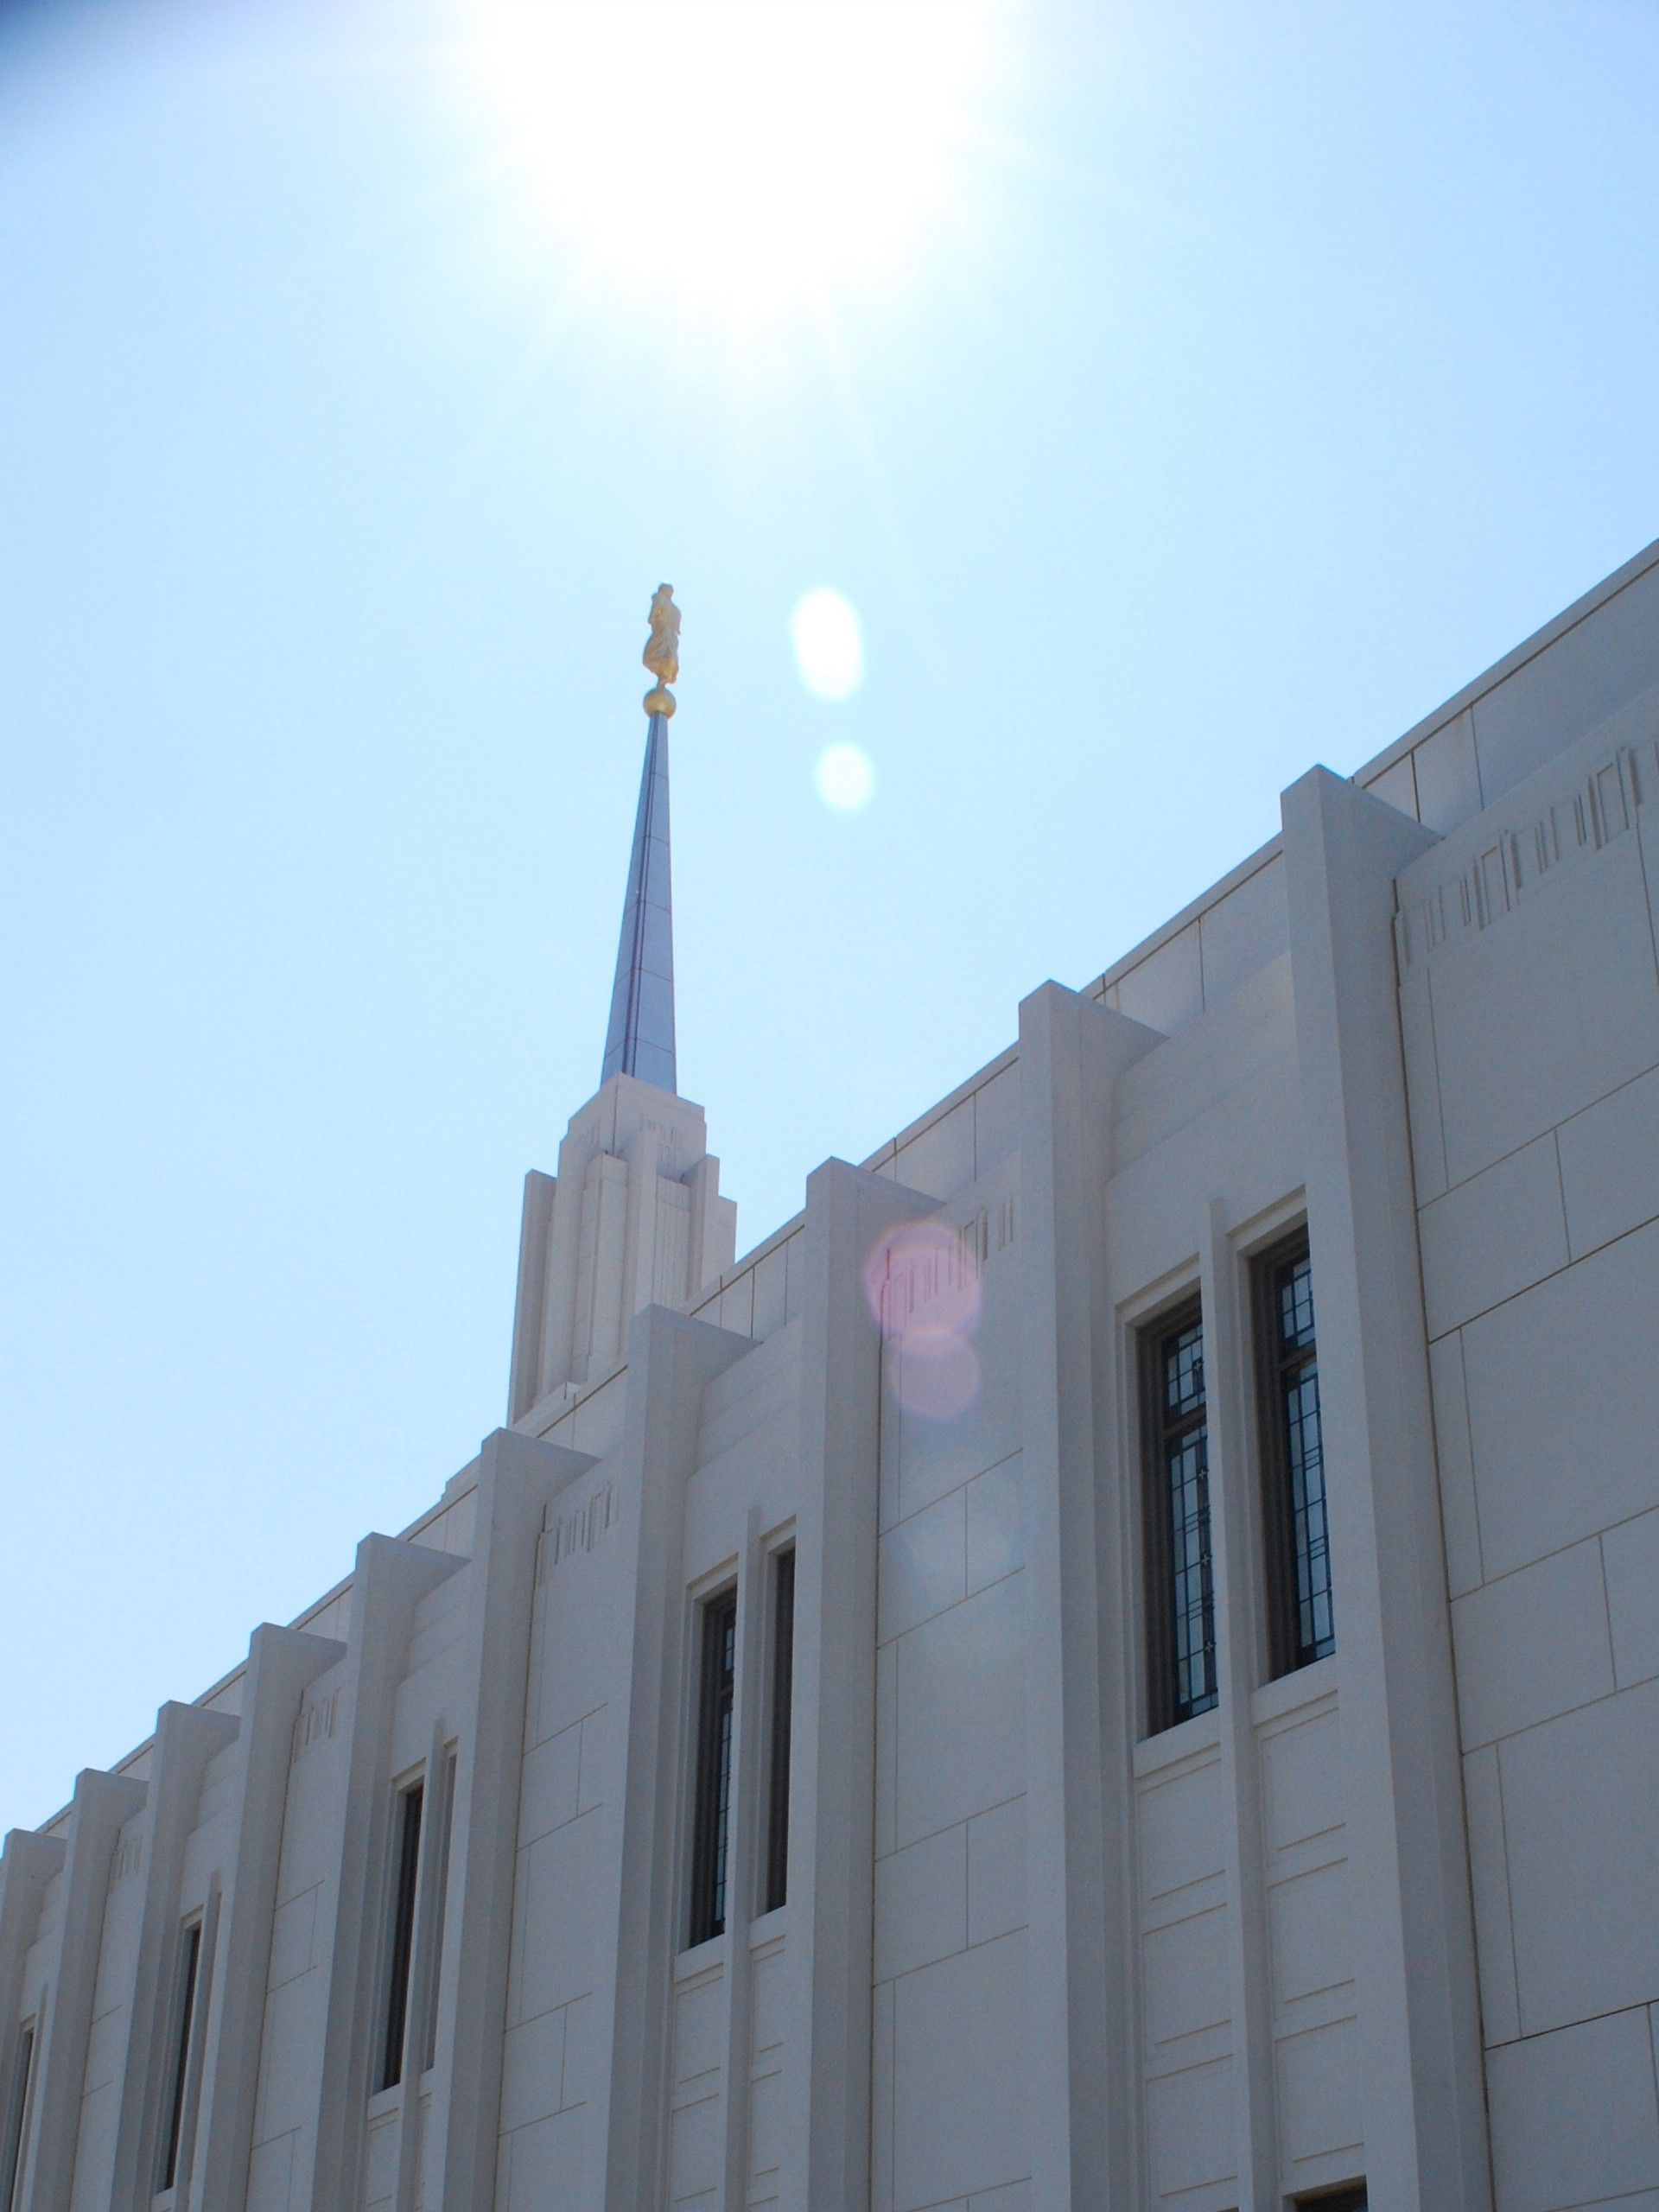 The Twin Falls Idaho Temple north side, with the windows and spire.